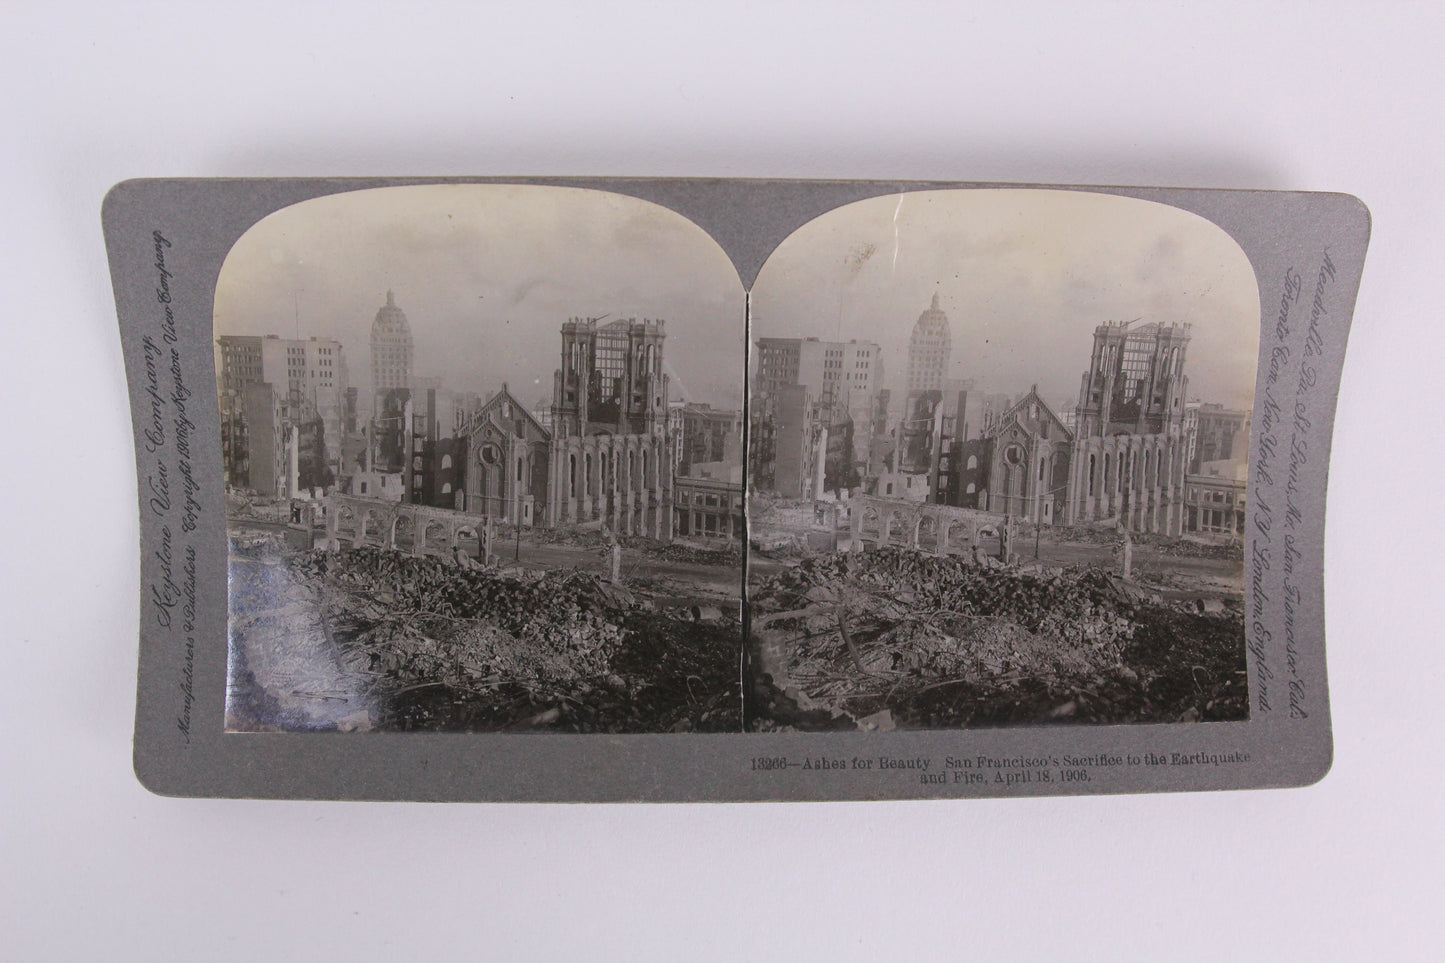 Five Keystone Stereo Cards of the Aftermath of the 1906 San Francisco Earthquake